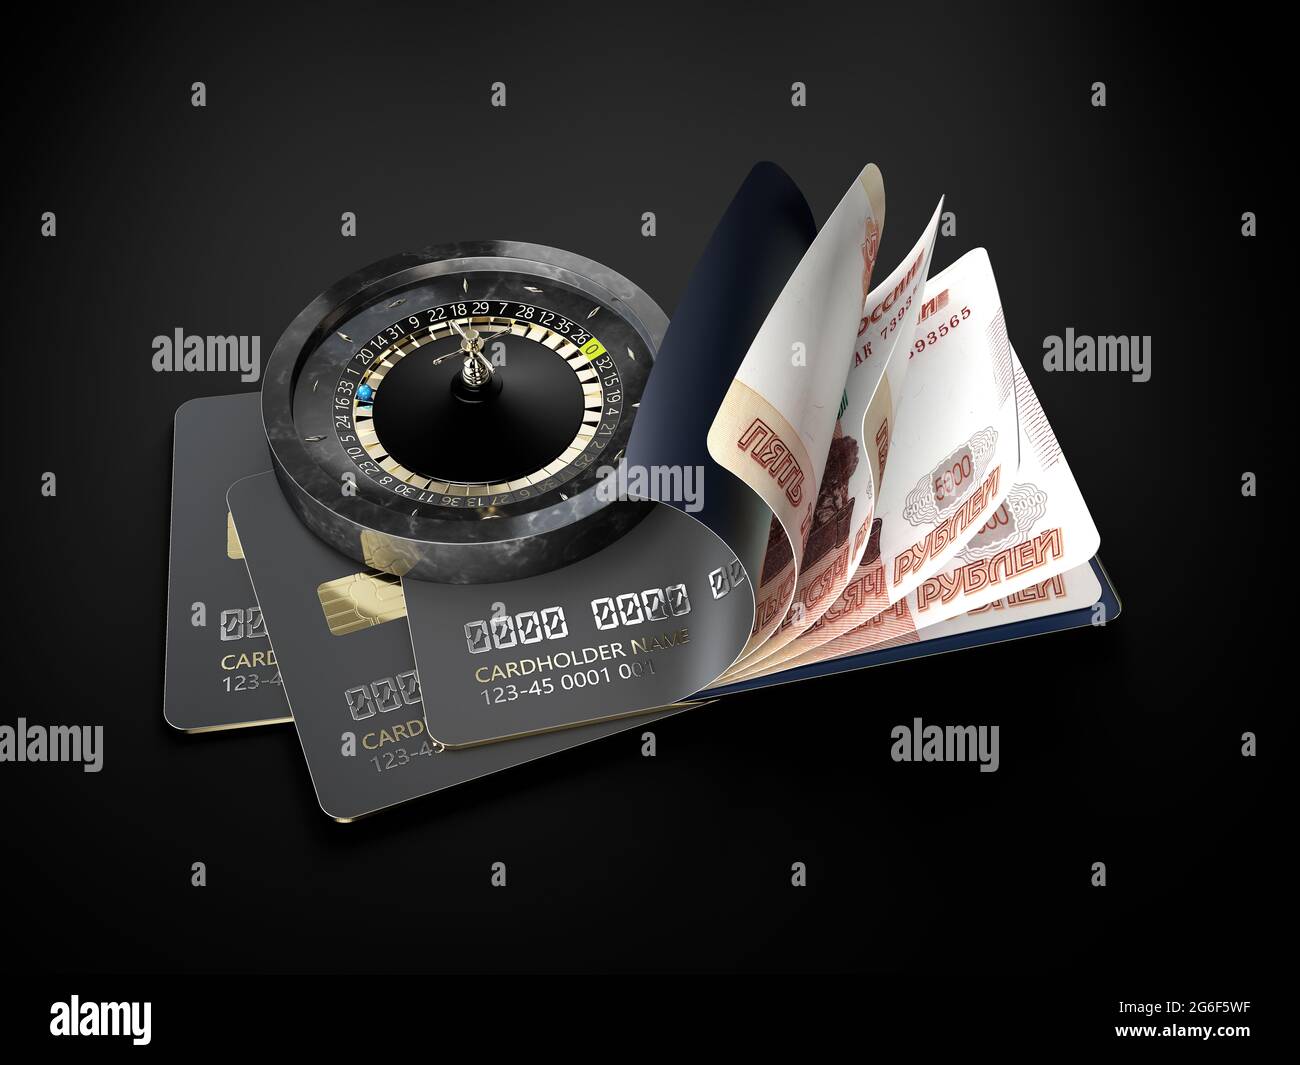 3d Rendering Of Credit Card With Russian Banknotes And Roulette Online Casino Concept Clipping Path Included Stock Photo Alamy